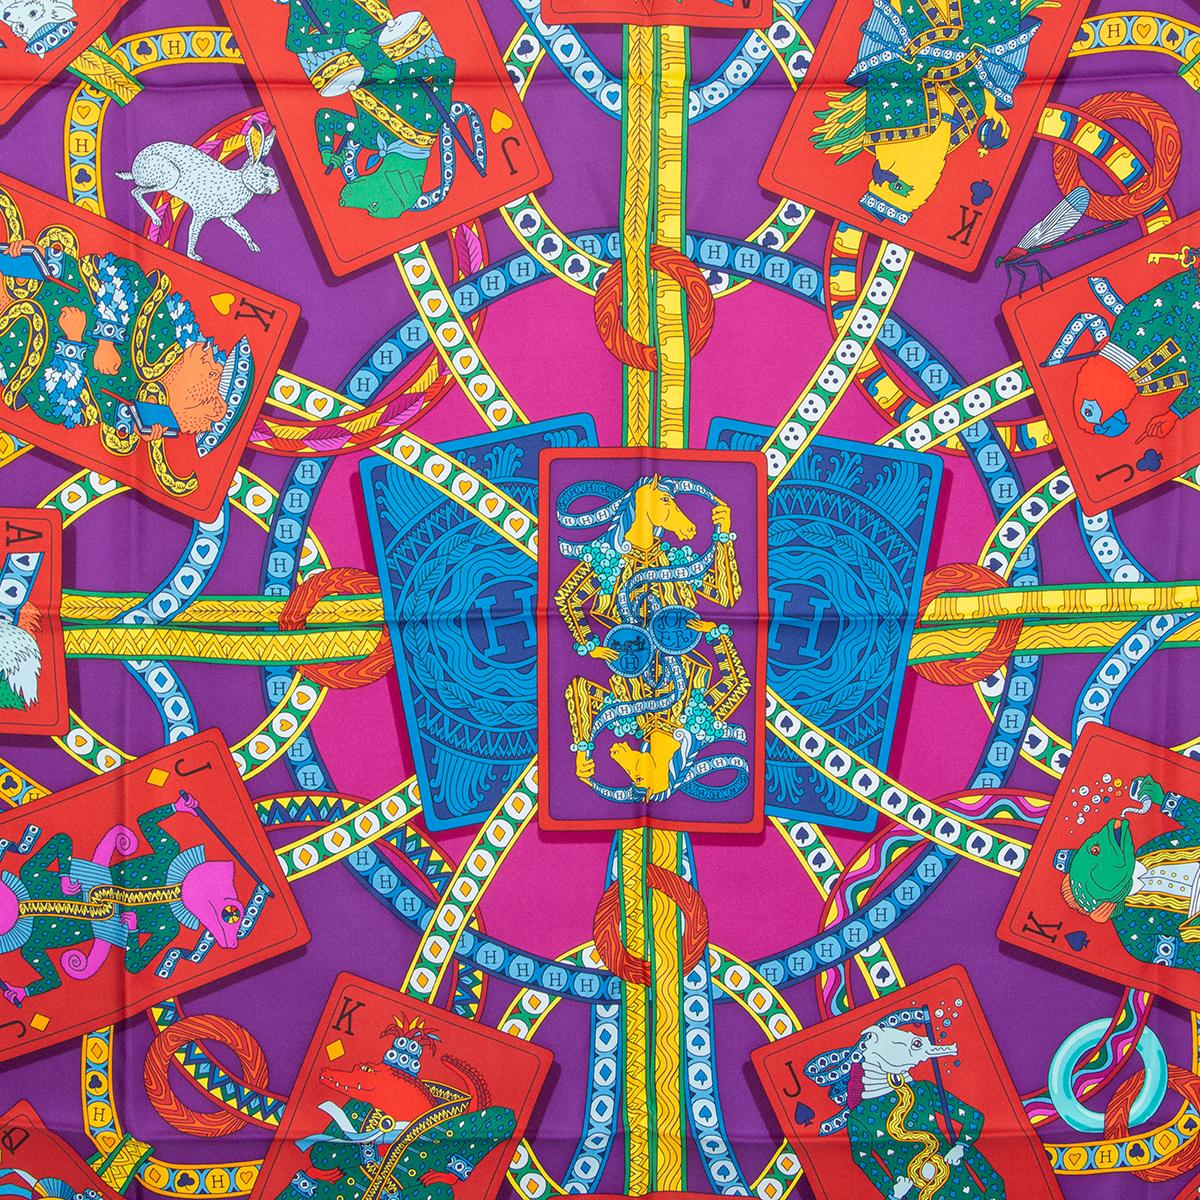 Hermes 'Dame de Coeur 90' scarf by Pierre Marie in fuchsia silk twill (100%) with purple center and details in red, yellow, turquoise, green and light blue. Has been worn and is in excellent condition.

Width 90cm (35.1in)
Height 90cm (35.1in)